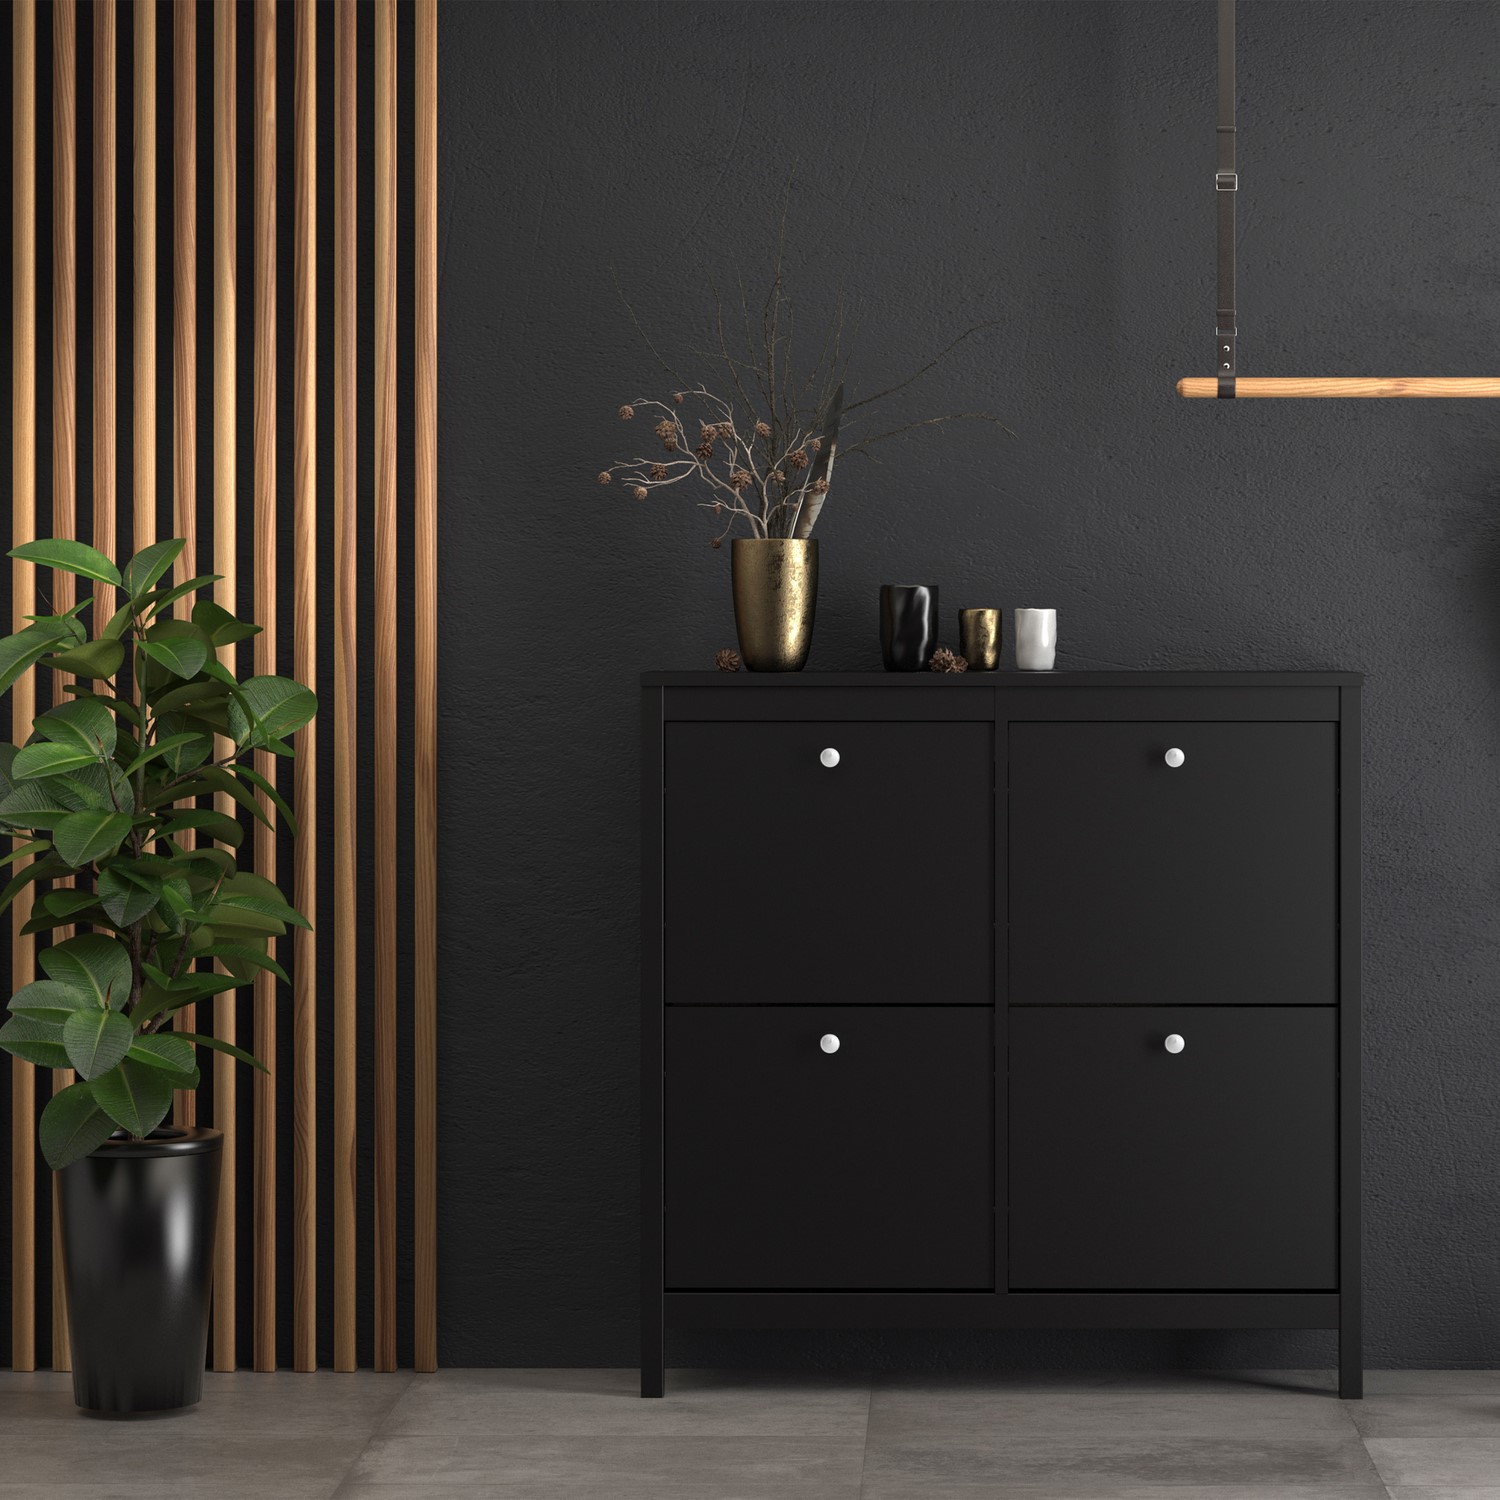 Read more about Black shoe cabinet with 4 cabinets madrid